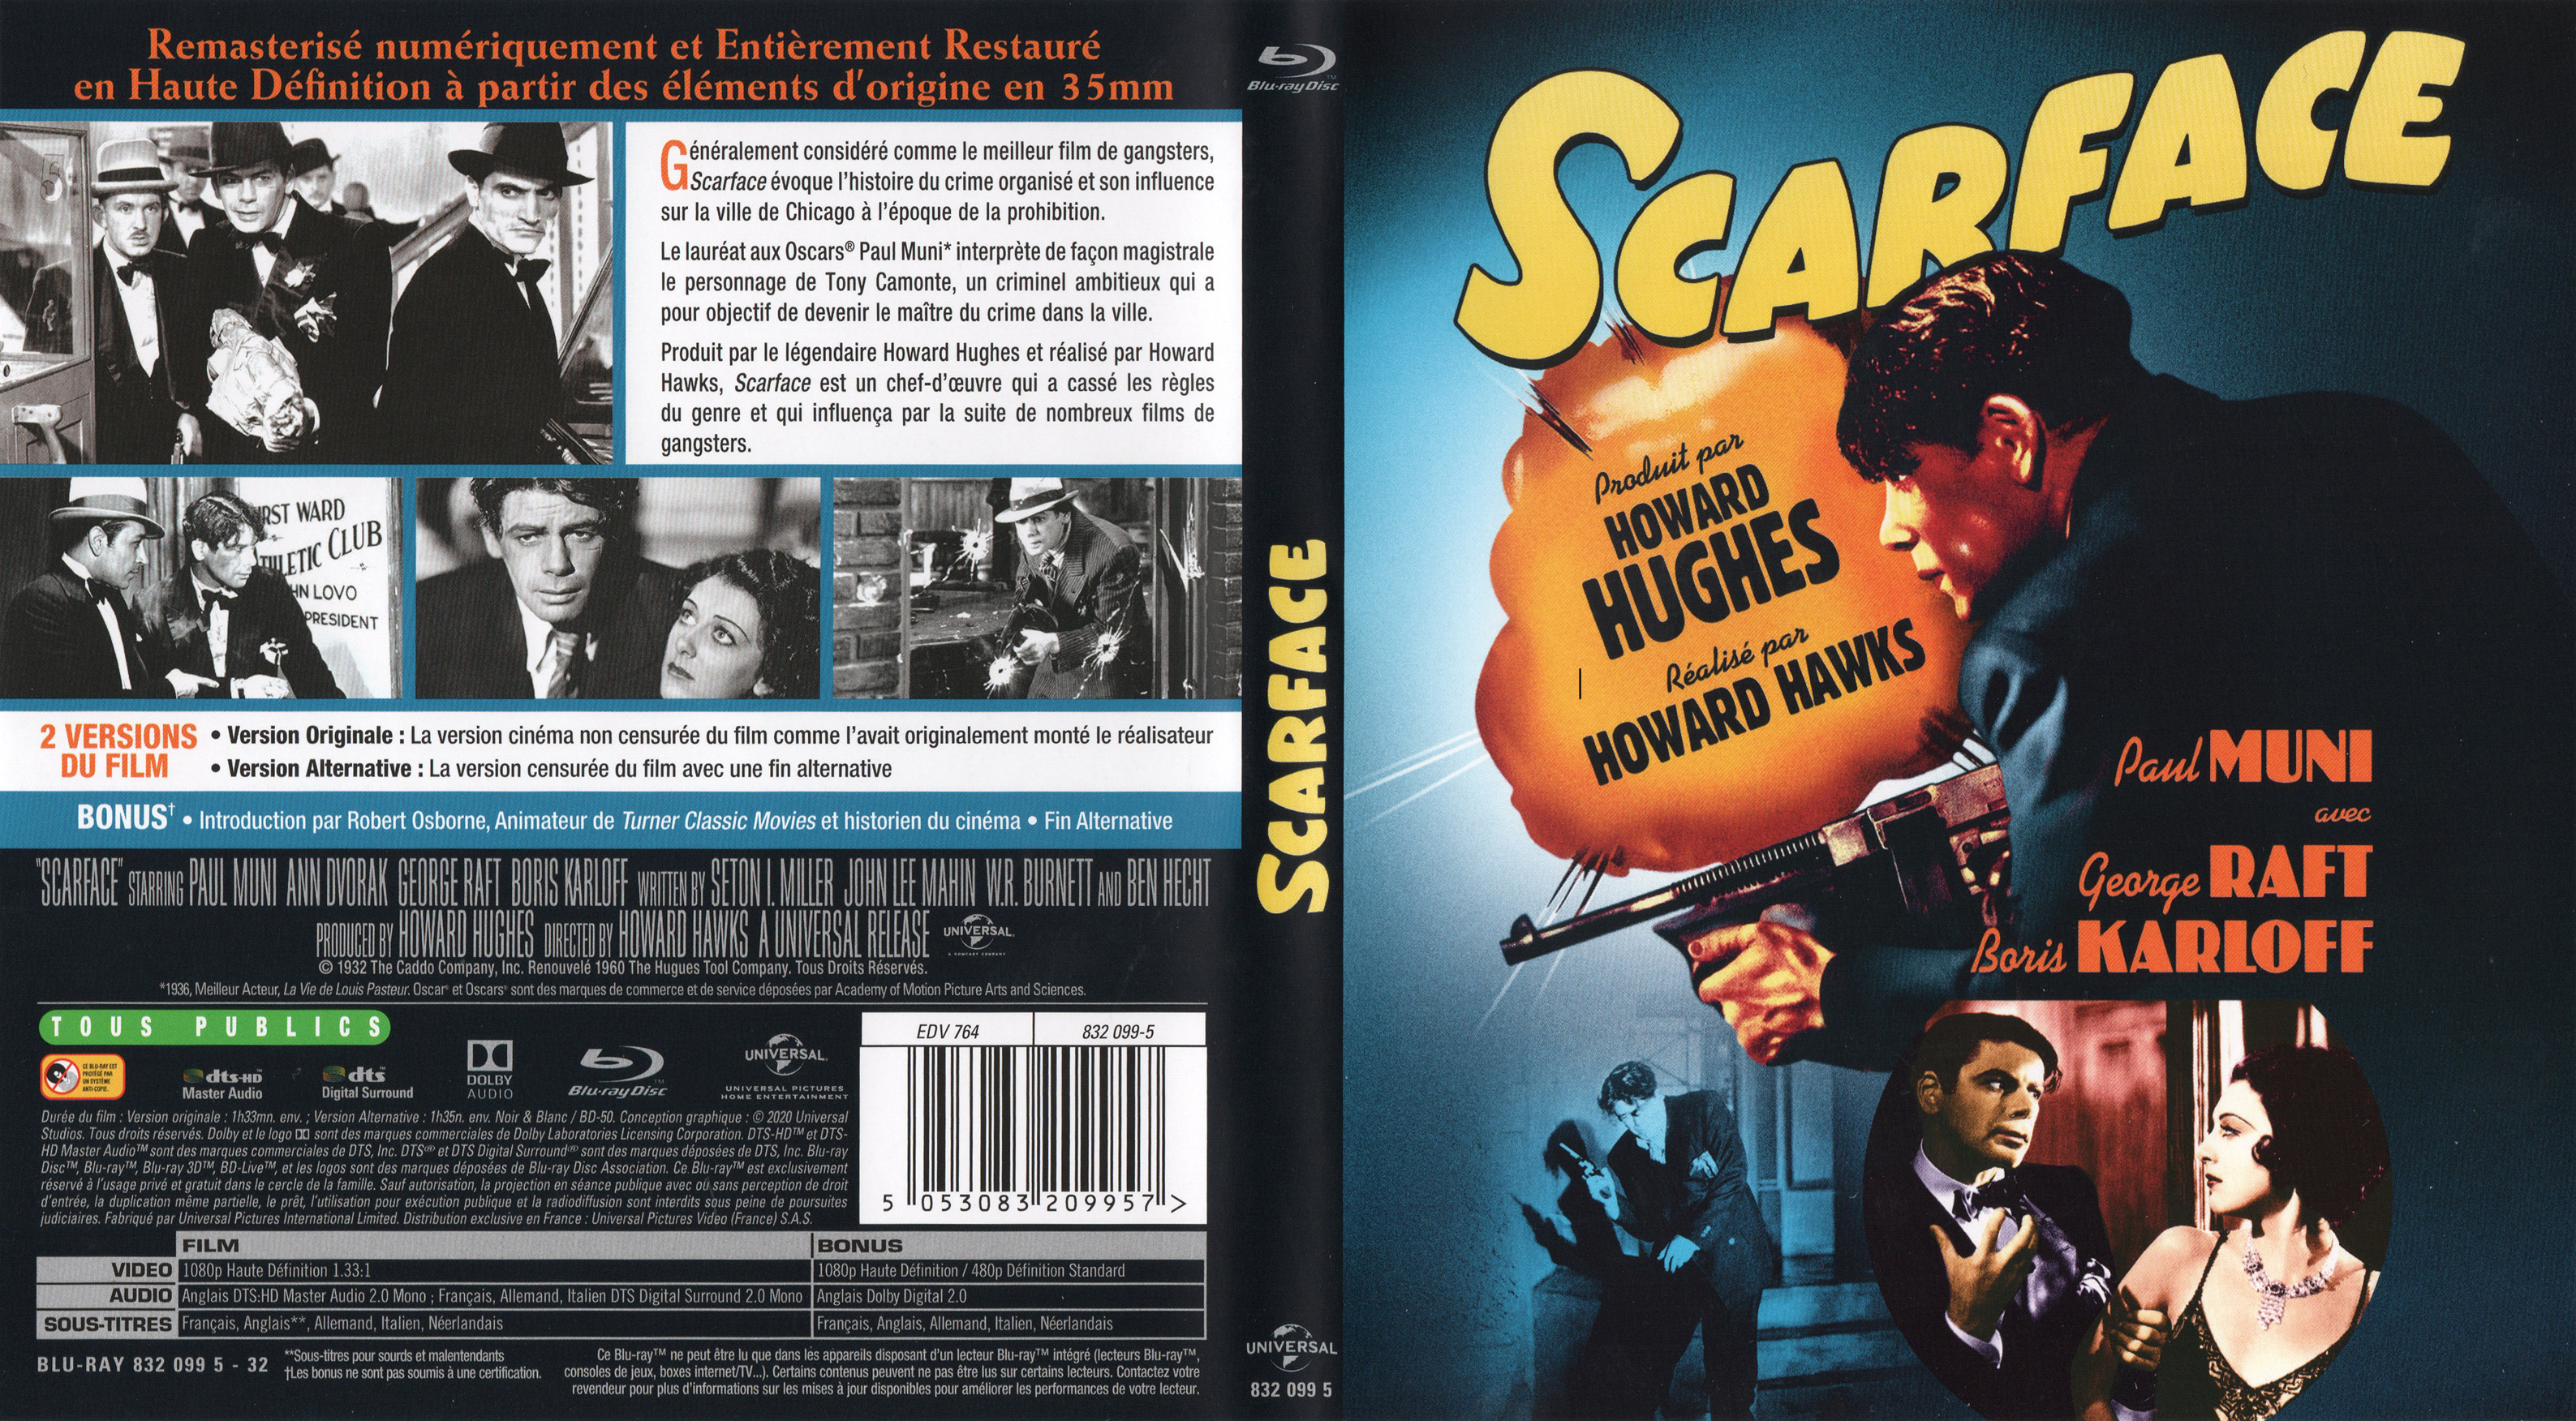 Jaquette DVD Scarface 1932 (BLU-RAY)